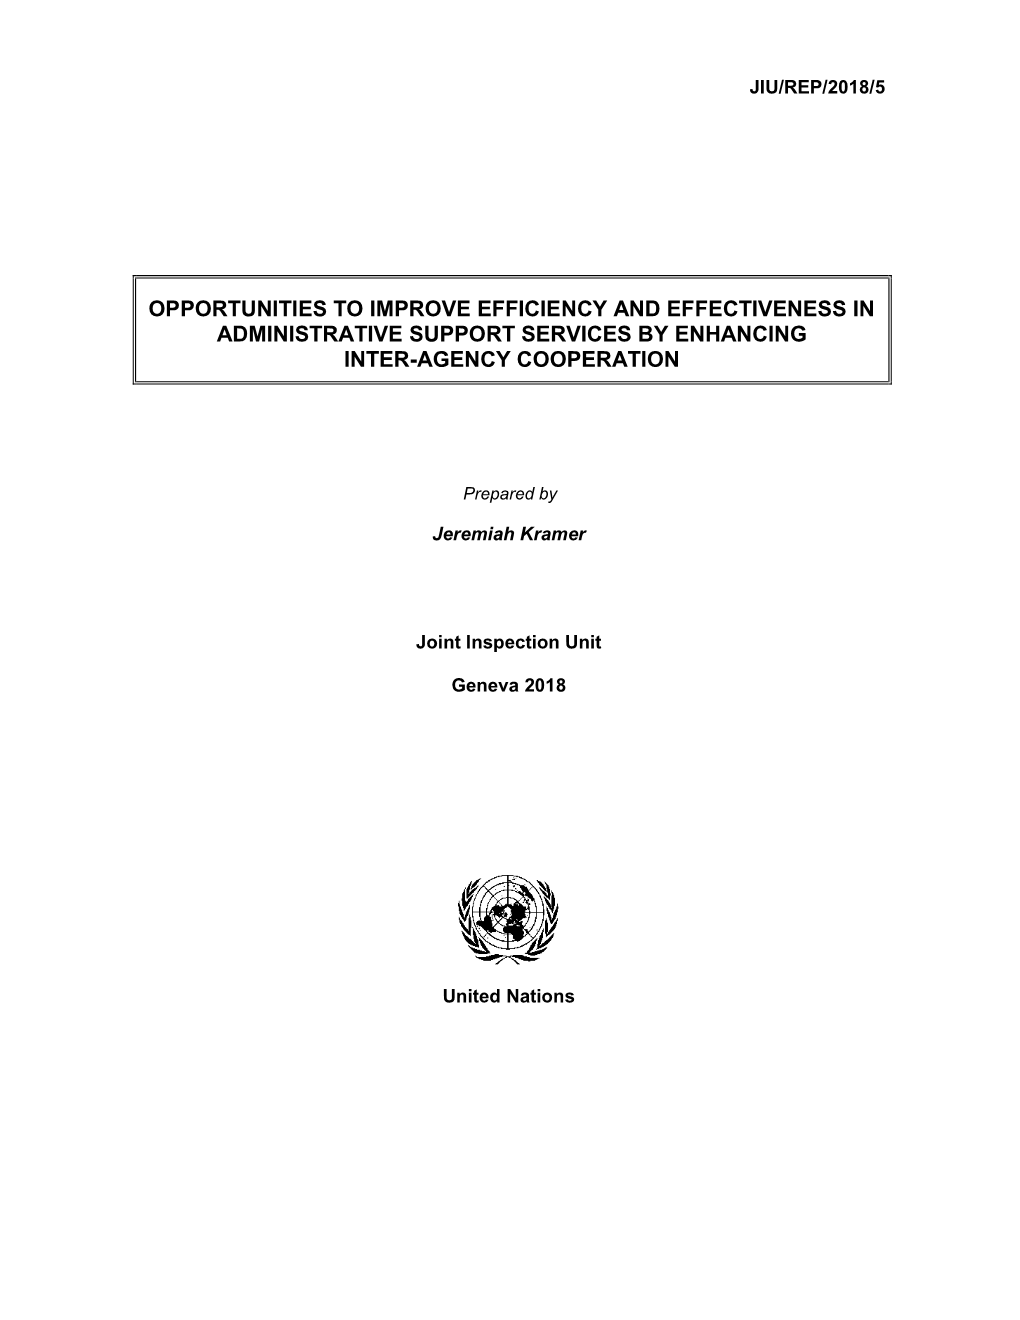 Opportunities to Improve Efficiency and Effectiveness in Administrative Support Services by Enhancing Inter-Agency Cooperation